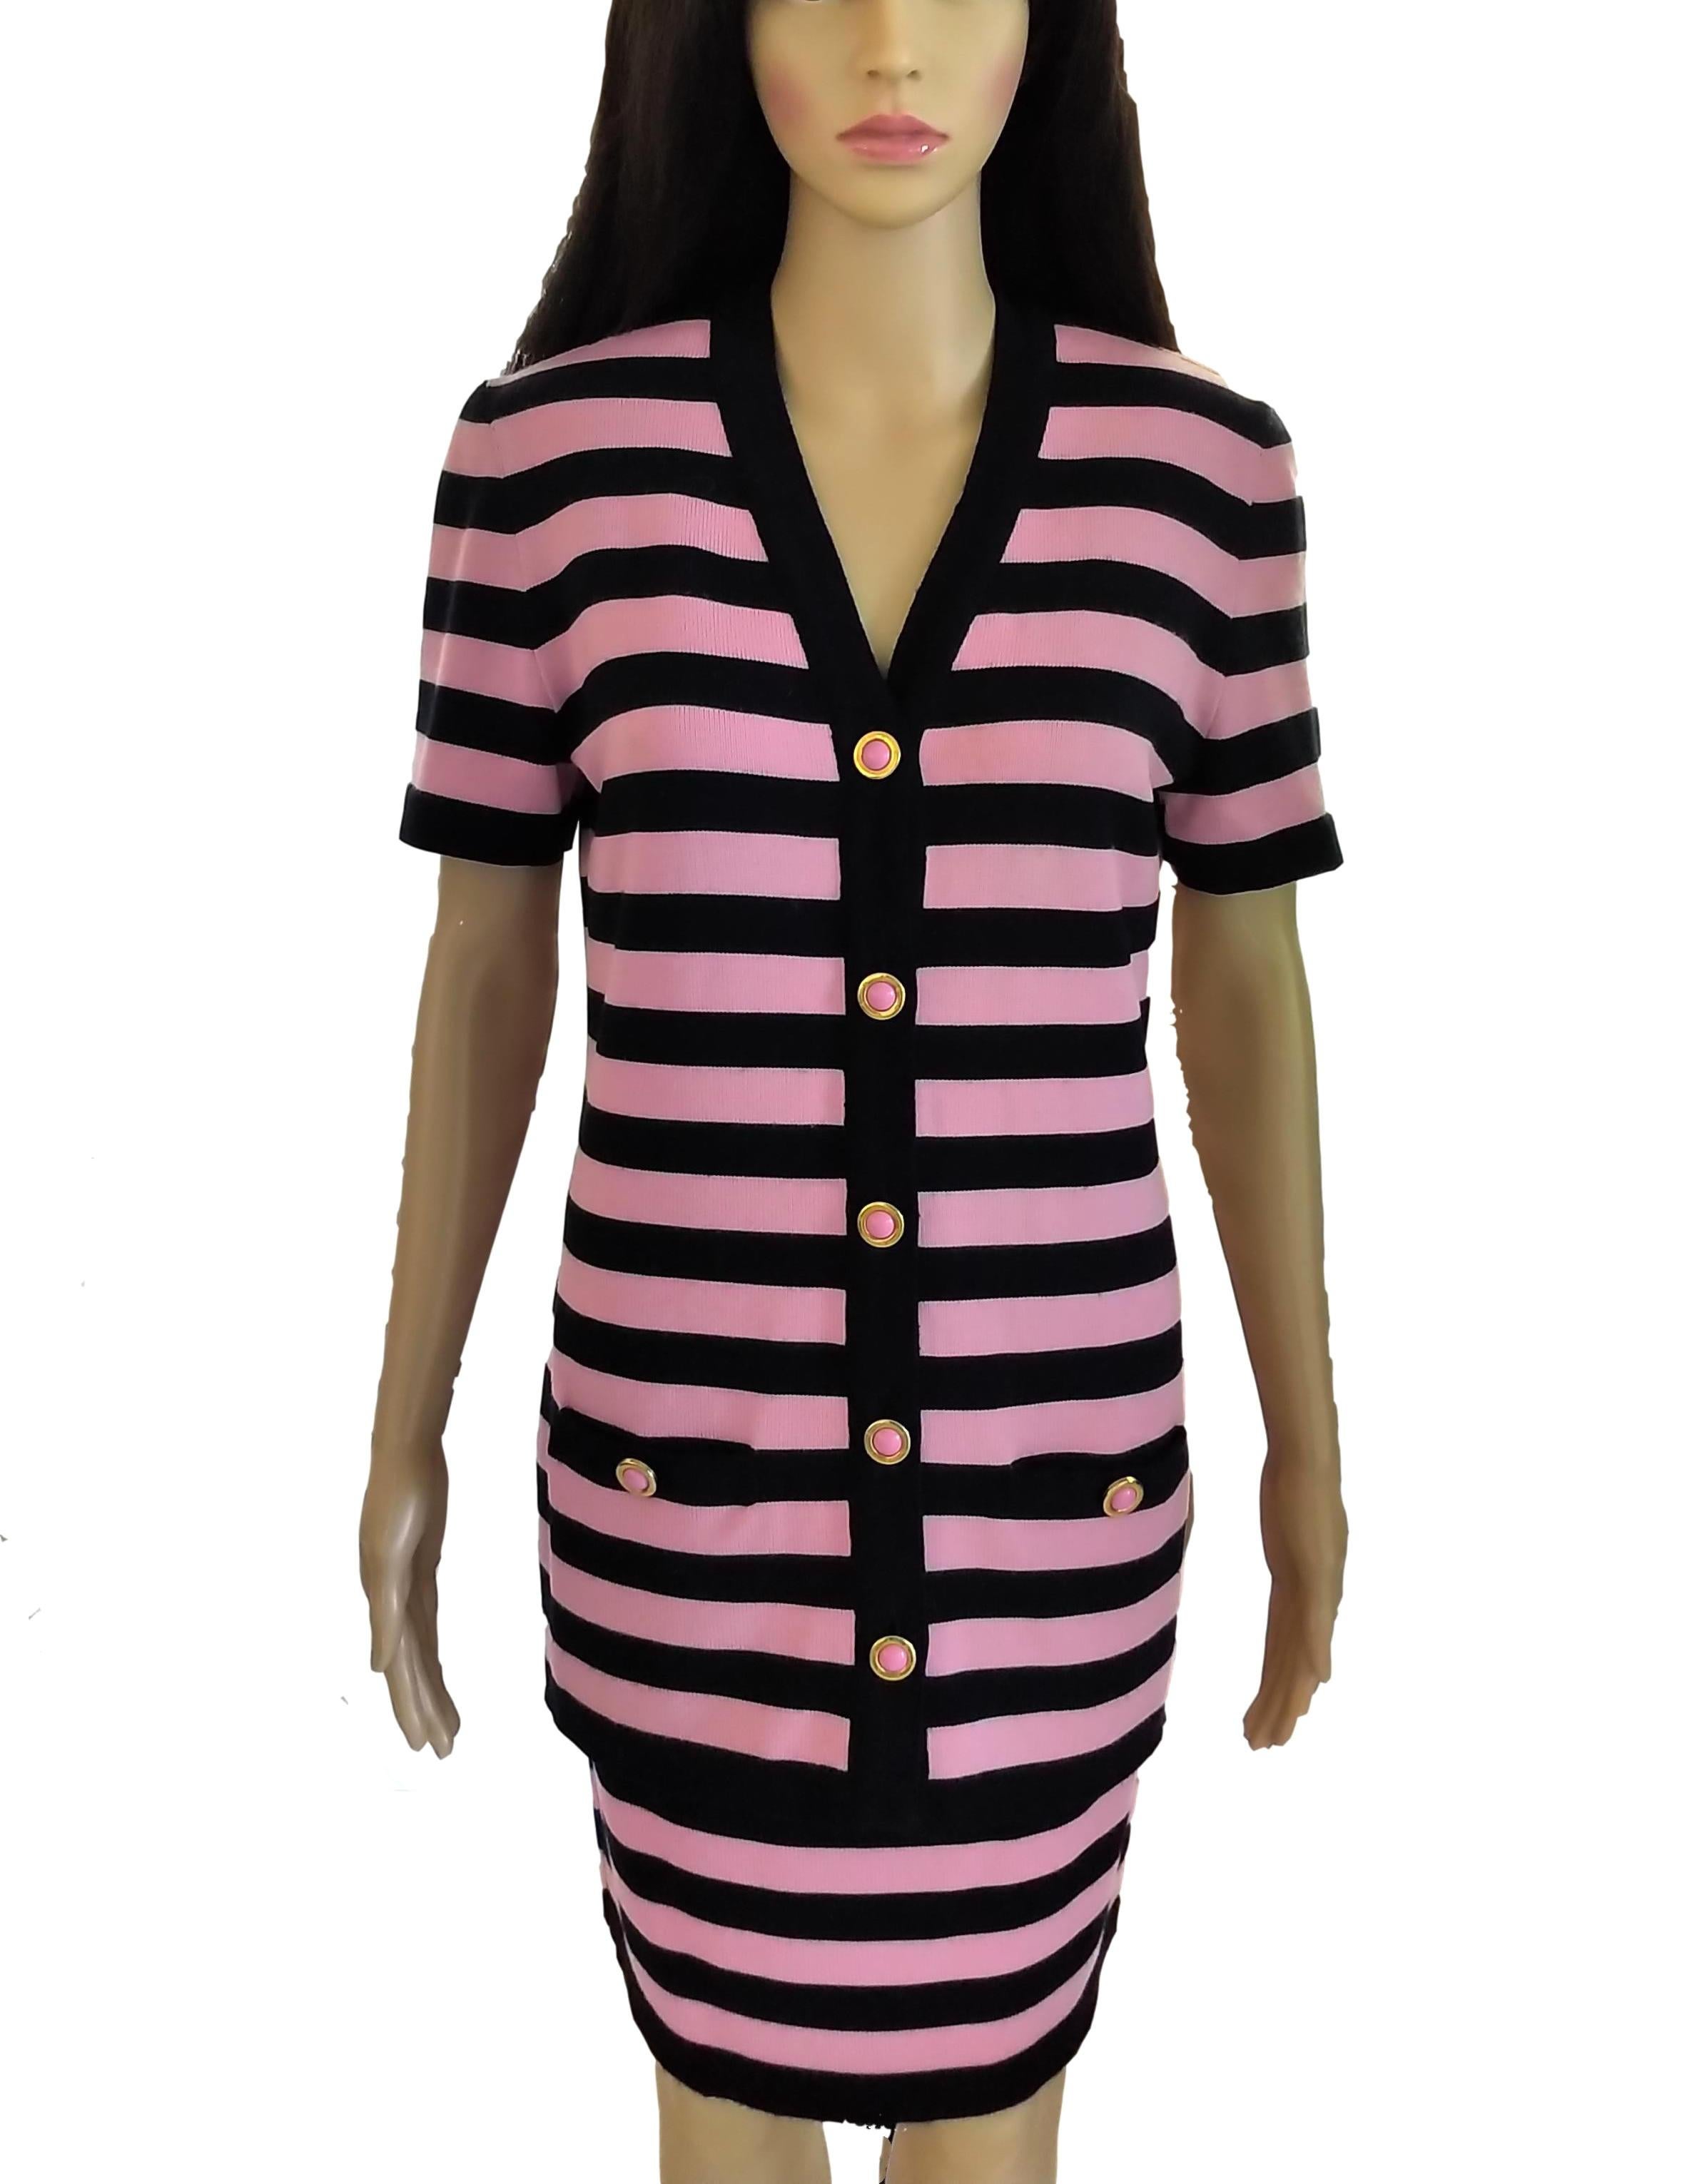 Lovely, vintage Escada by Margaretha Ley 2 piece, pink & navy ribbed striped short sleeve jacket & pencil skirt suit in size EU 36/ US 6.  Very fresh, feminine & flattering set circa 90's. Beautifully crafted in high quality soft & substantial wool.